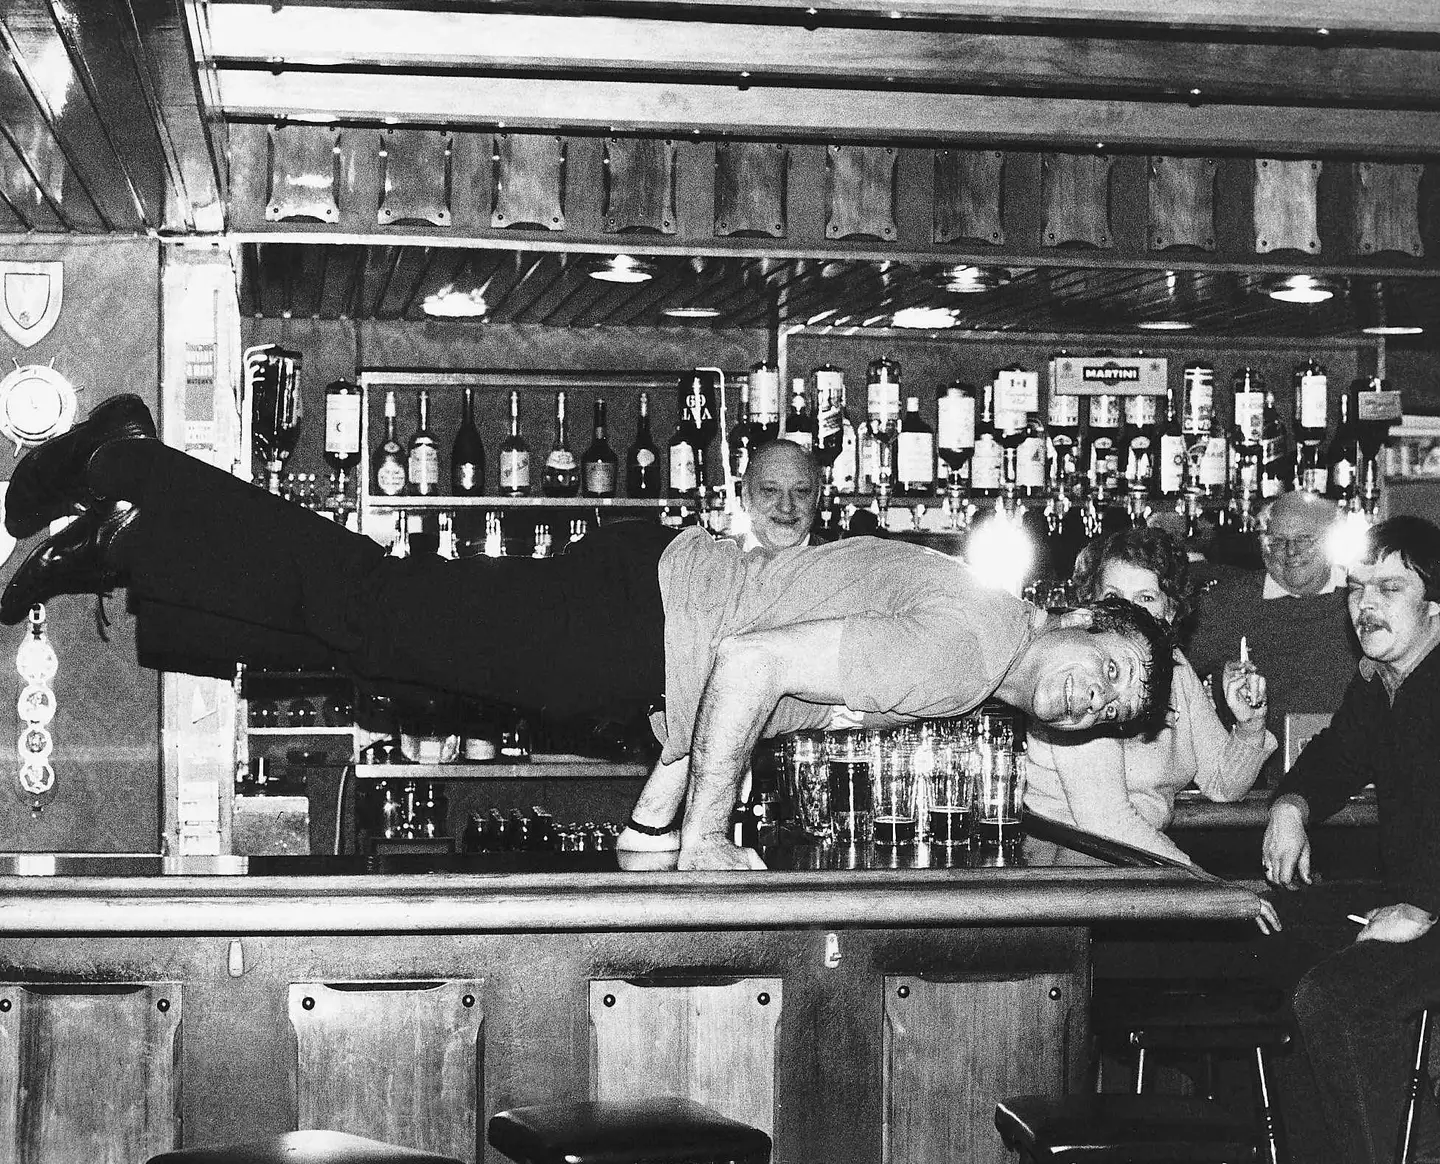 Oliver Reed performing a party trick on the bar.